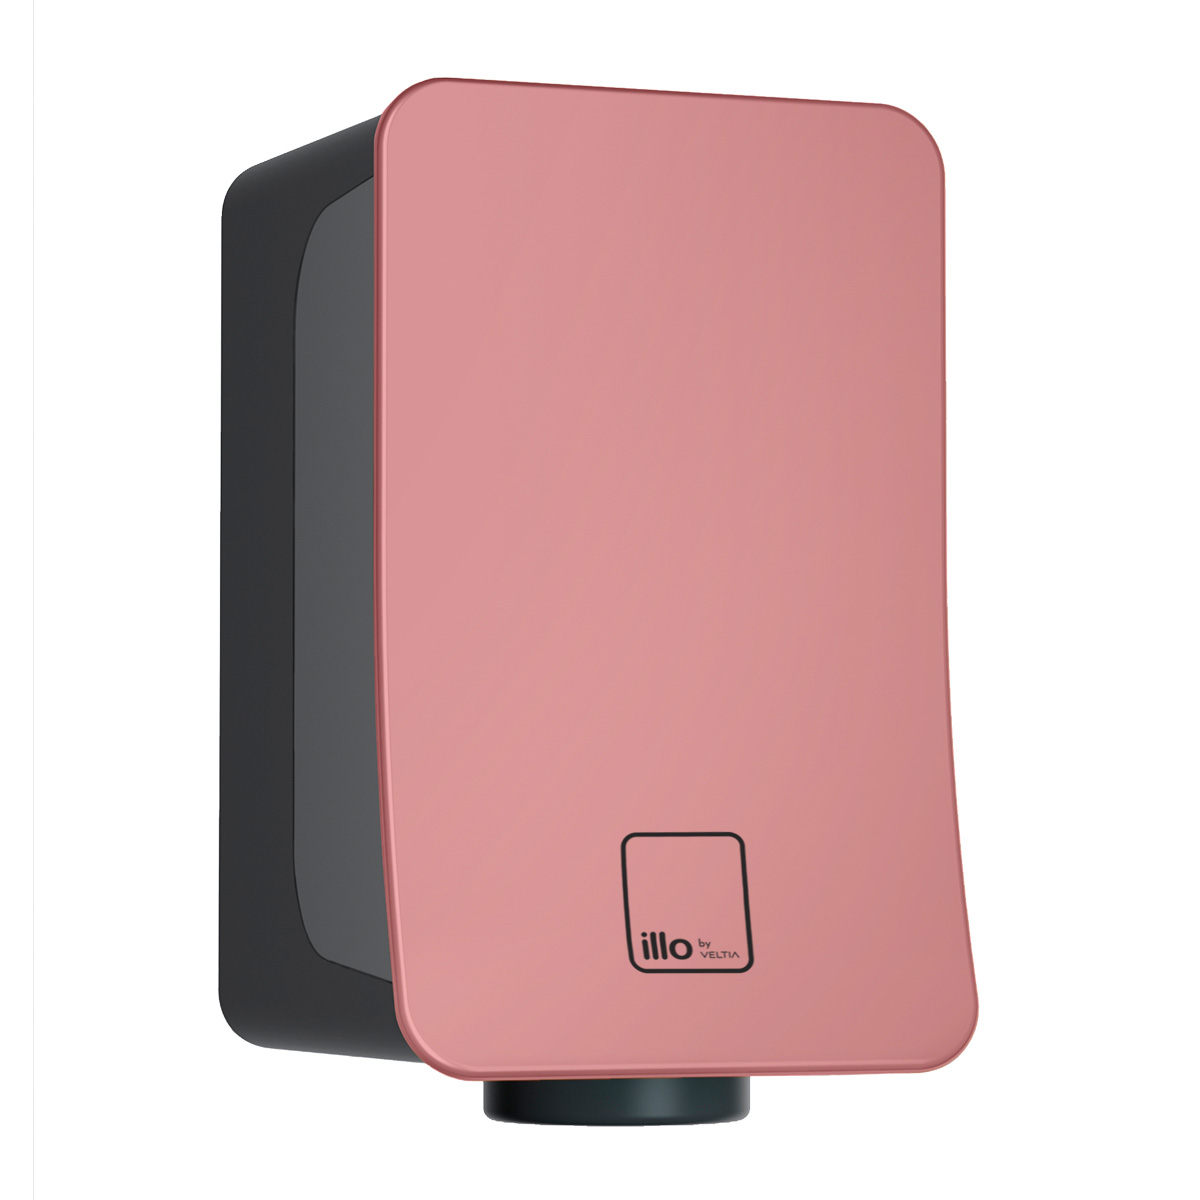 iIllo by Veltia Hand Dryer - Pink - thumbnail image 1